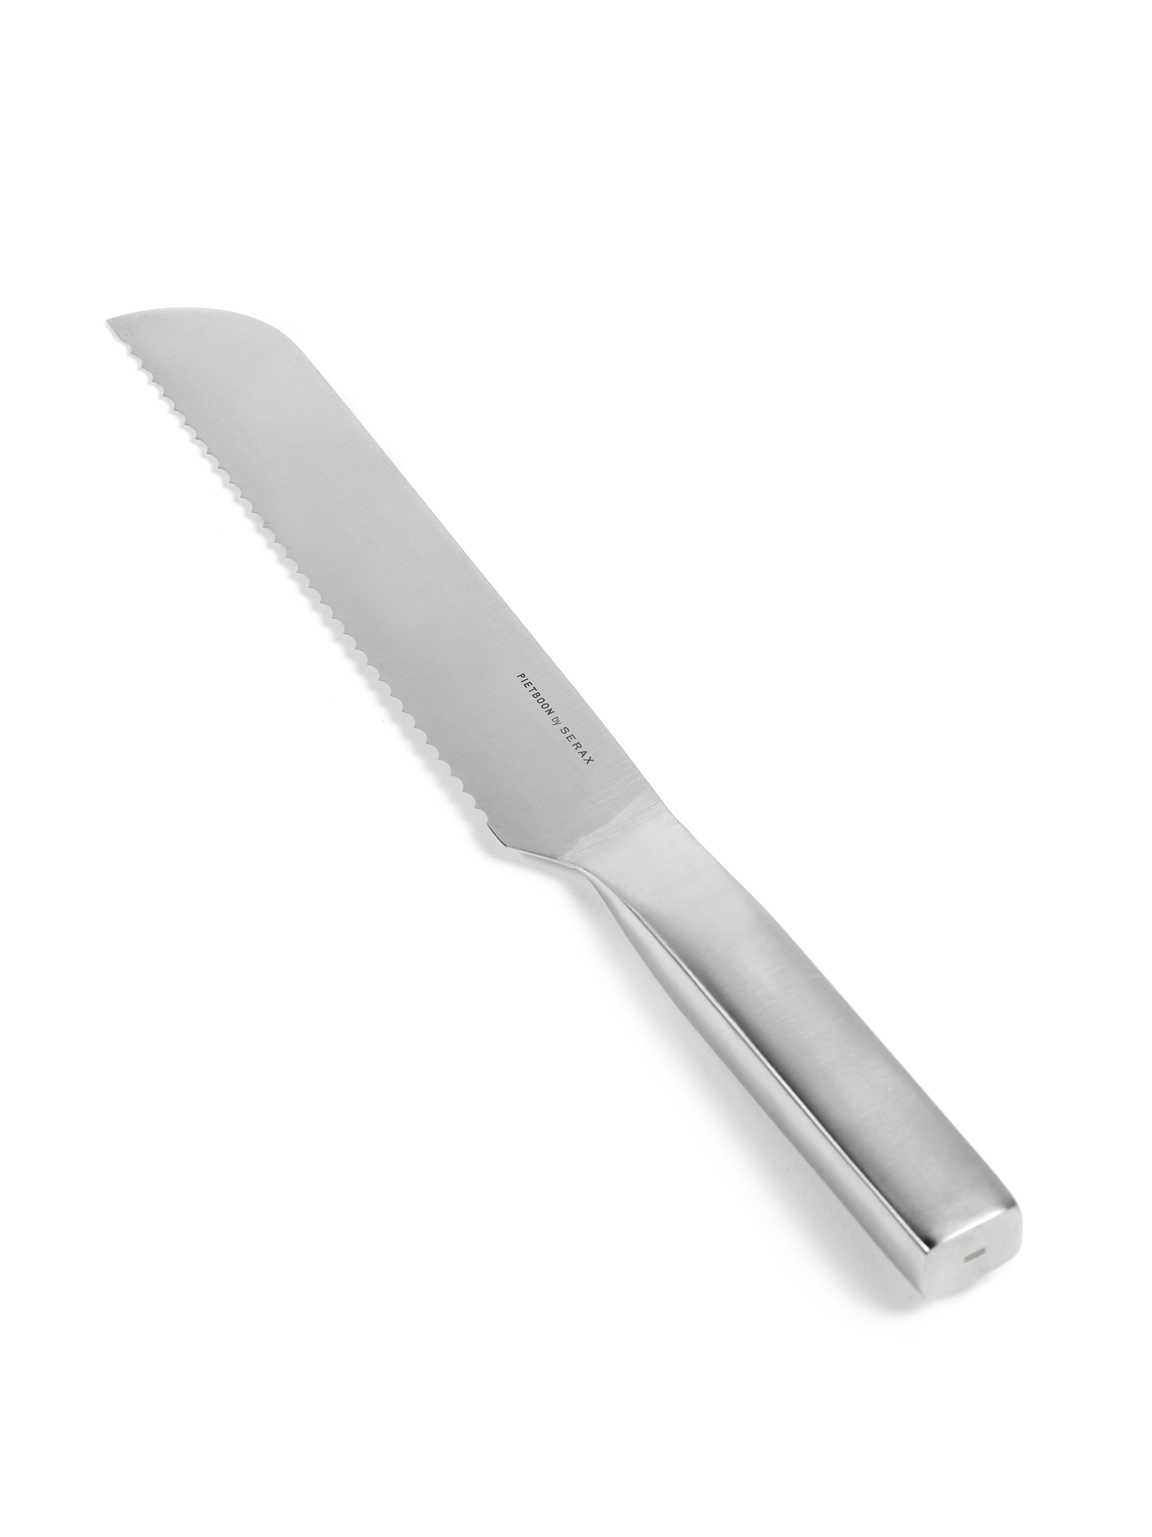 Base Bread Knife - THAT COOL LIVING